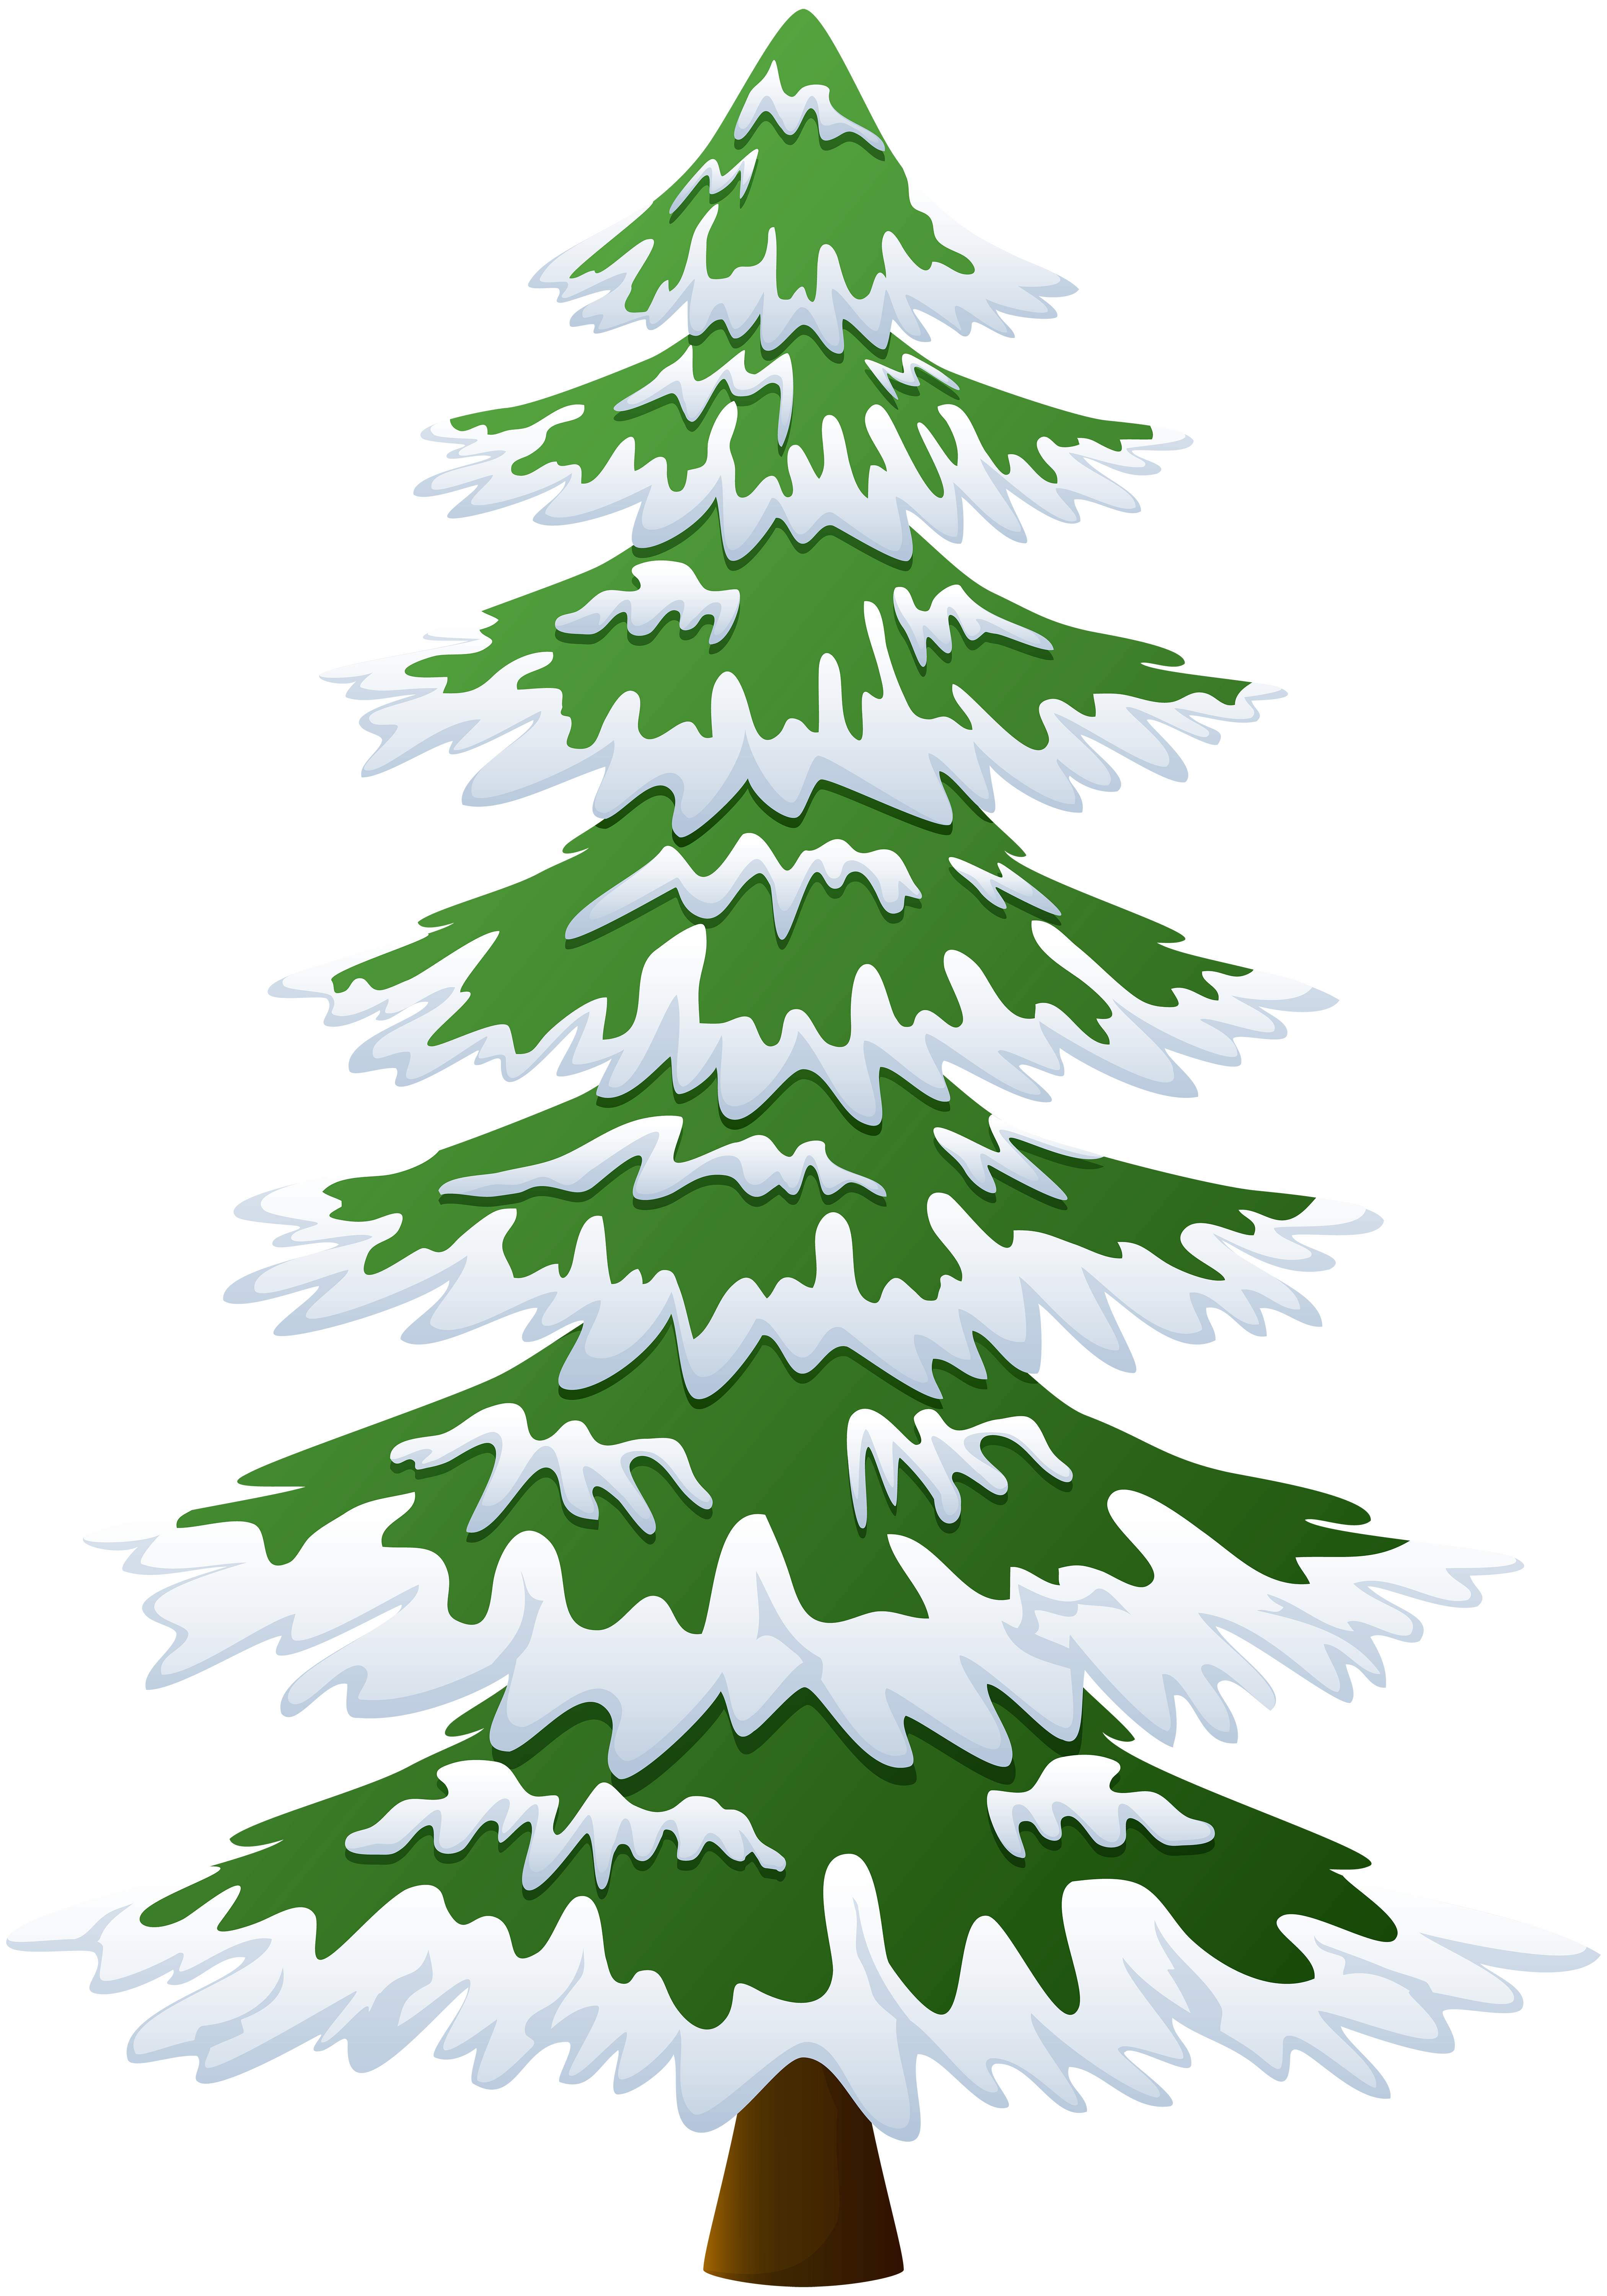 Snowy Pine Tree Transparent PNG Image.